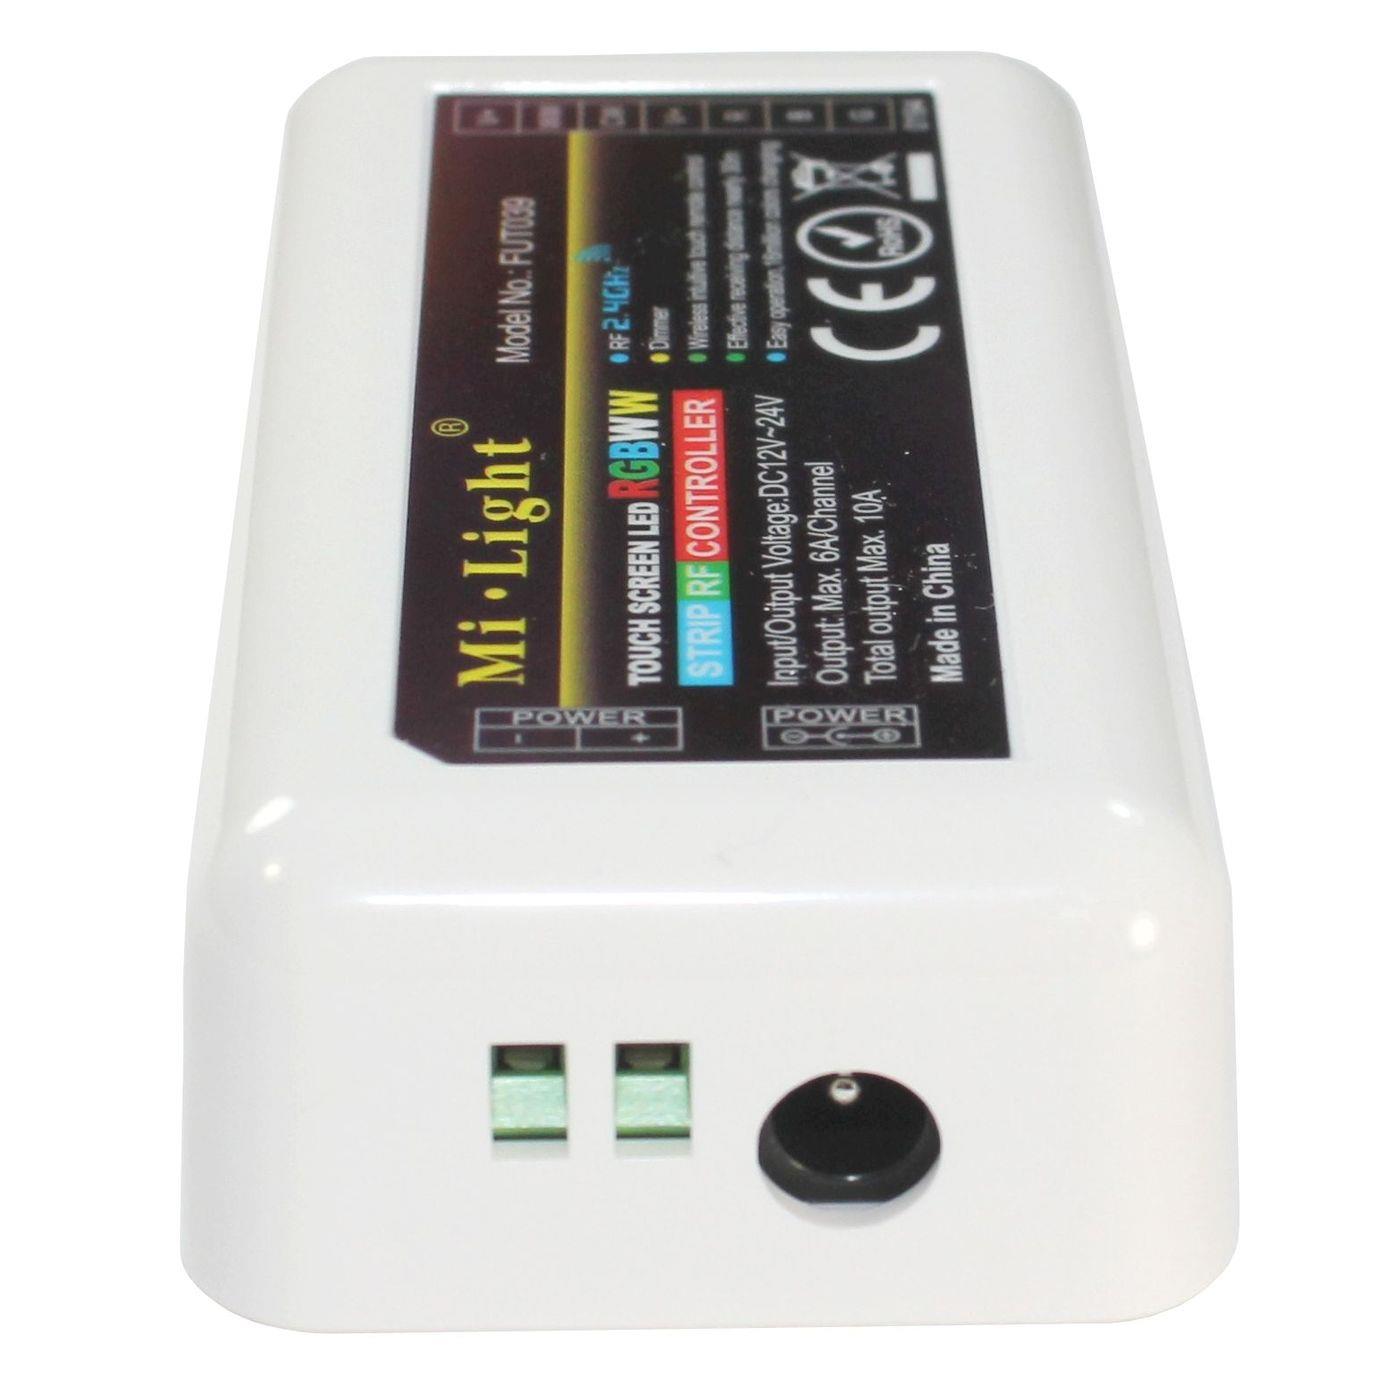 MiLight MiBoxer RGBW CCT LED 4-Zone Receiver 12...24V 240W for colour changing strips 6-Pin